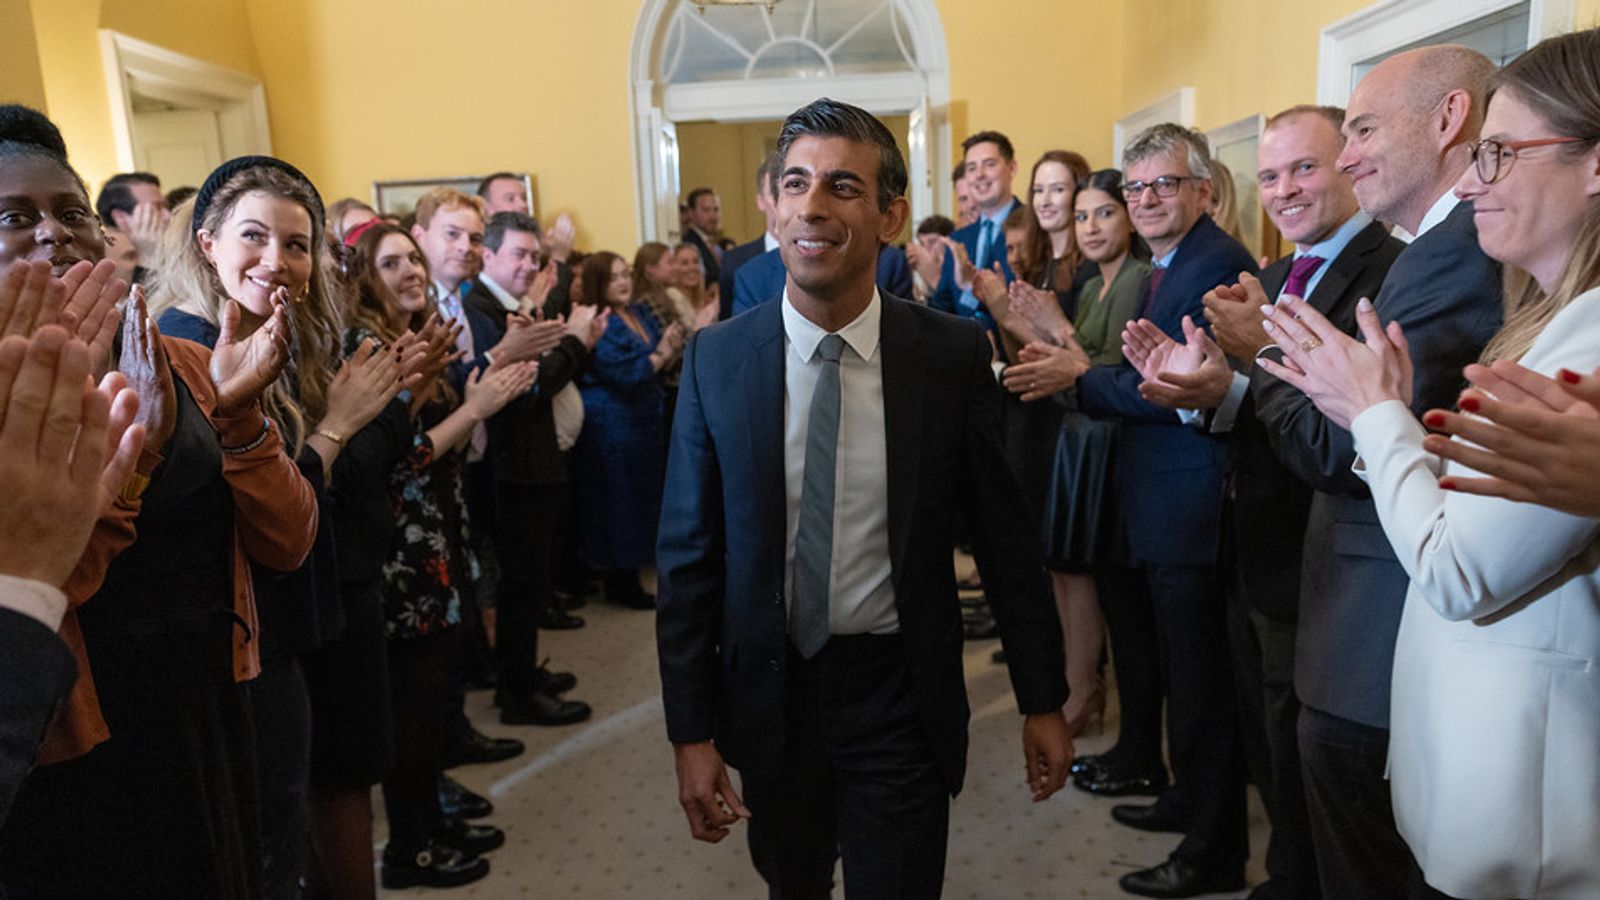 Rishi Sunak will need all the help he can get from cabinet - he faces toughest situation any PM has had for decades | Beth Rigby